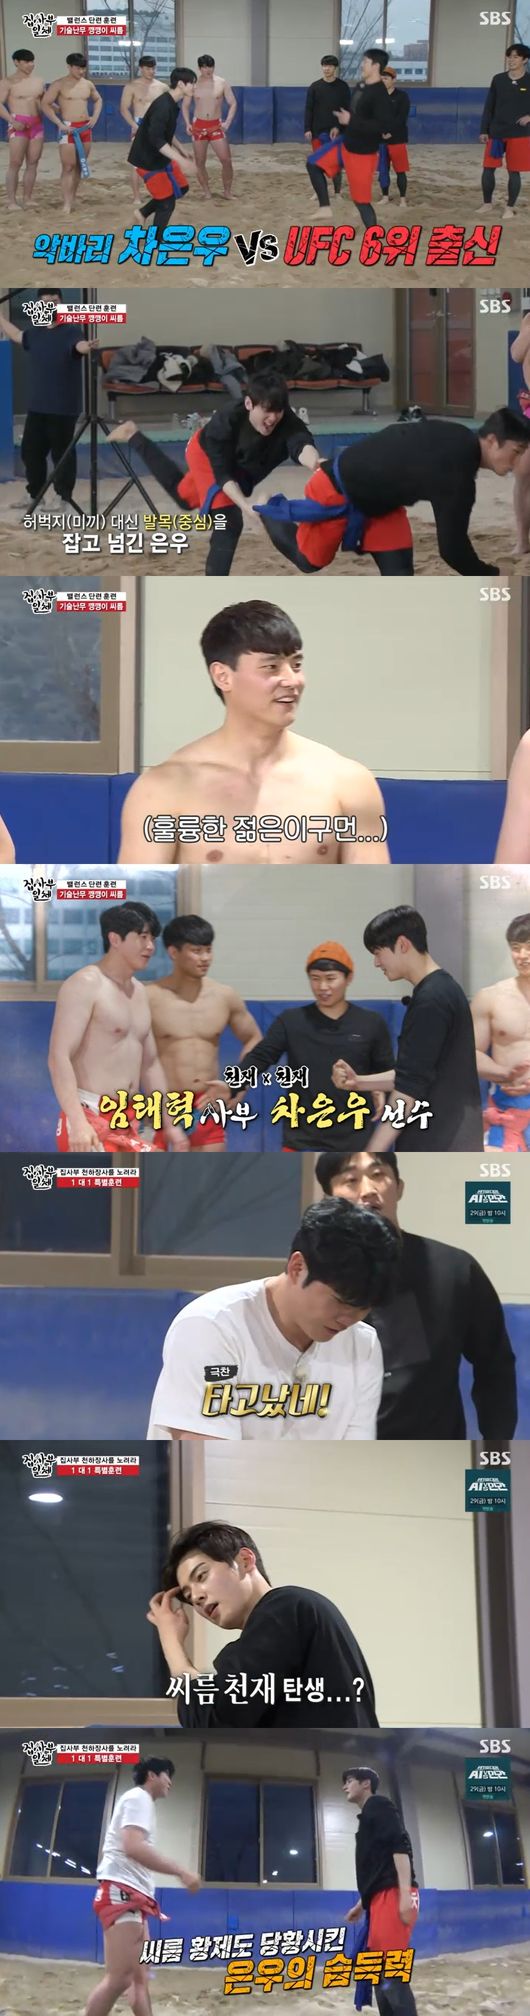 On the 24th, SBS entertainment All The Butlers gathered all the members on the wrestling board.In the 2000s, the youngest Taebaek, Vic-Fezensac heo Seon-haeng, No Bum-soo, Night if, and Lim Tae-hyuk appeared.The F4 players of the wrestling industry introduced each wrestling, and Lim Tae-hyuk said that only the Vic-Fezensac title was 17 times, and Lee Seung-gi said, I heard from Ho Dong-hyung that it is not normal to listen to Vic-Fezensac title 10 times. Lim Tae-hyuk said, I personally did 17 times, I gave a laugh to her.The youngest heo Seon-haeng player said that Kim Dong-Hyun would be handed over with one hand with technology, and Kim Dong-Hyun took a serious stance with UFC pride, but heo Seon-haeng surprised everyone by handing it over to one room with wrestling technology.It was a taste battle that showed the charm of Daeheung and wrestling in all the excitement of technology beyond weight class.Among them, the All The Butlers Boat Vic-Fezensac Ssireum Contest was announced. The heat was getting hotter when it was awarded a gold calf of pure gold.One-on-one coaching began in the pride battle of the Vic-Fezensac title.Night if said, Hatje Cantz Verlag training is more important than the upper body.Especially when I saw the muscle-trained Night if Hatje Cantz Verlag, I said that I would knock down the Night if except Kim Dong-Hyun, and all of them fell the Night if in anticipation.Turns out Kim Dong-Hyun was laughing when he was drawn to wearing Yang Se-hyeongs hat and lifting the Night if secretly.Lim Tae-hyuk will play ace Cha Eun-woo Choices, Night if Shin Sung-rok, No Bum-soo Yang Se-hyeong, Heo Seon-haeng Lee Seung-gi and Kim Dong-Hyun will play for themselves.Each of them had a one-on-one special training program and a full-fledged wrestling table. Not only the players but also the masters were proud.Lee Seung-gi and Yang Se-hyeong Battle first, Lee Seung-gi succeeded in field bridge technology and passed Yang Se-hyeong.Next up was Cha Eun-woo and Shin Sung-rok, who dominated the advantageous highlands in battle with Battle and Shin Sung-rok.The two men, who were in the game, showed a tight struggle and Cha Eun-woo turned the game over with a last-minute reversal.Lee Seung-gi was in the final with a minor victory, and Cha Eun-woo was battle with Kim Dong-Hyun.Kim Dong-Hyun was ahead of the turn with power, with Cha Eun-woo, who was reborn as a wrestling genius, paying attention to whether Kim Dong-Hyun could win.Lee Seung-gi and Kim Dong-Hyun played the final Battle, and Lee Seung-gi showed confidence in the field legs.So, Lee Seung-gi promised to make a field bridge technology and turned into a field bridge bot, but Kim Dong-Hyun won one victory by blocking it with power.Lee Seung-gi tried again the field bridge, and won one win each in one room, while starting the second game with a spleen figure.Only the last three games were left, and it was noted that Lee Seung-gi would play a reversal with a field bridge.In a fierce game, Kim Dong-Hyun took a moments eyeball, Lee Seung-gi put on the last field bridge technique, and Kim Dong-Hyun won the game.This made the All The Butlers ship Vic-Fezensac Kim Dong-Hyun.It was a time to once again check the power of World 6th-ranked UFC player Kim Dong-Hyun.Kim Dong-Hyun, who received the prize money from the gold calf, shouted Fathers Vic-Fezensac to his daughter and gave her a warm heart.[Photo] Capture All The Butlers Broadcast Screen